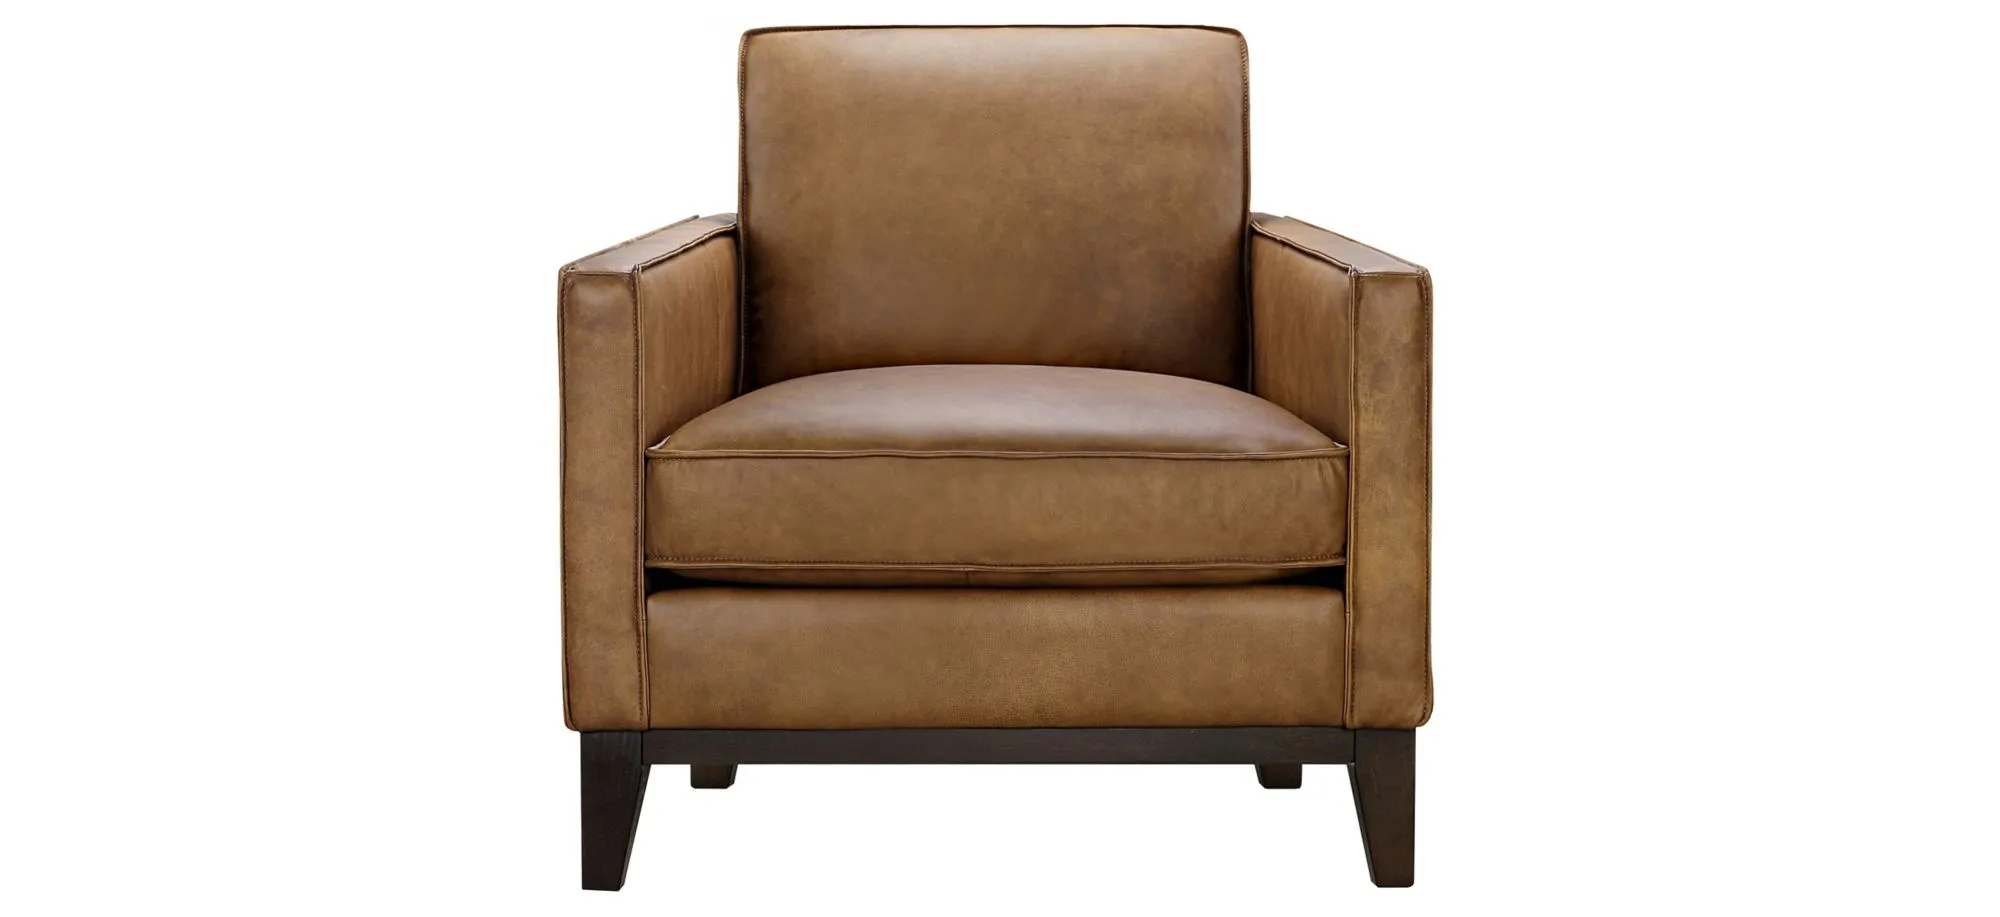 Roscoe Leather Chair in Honey by GTR Leather Inc